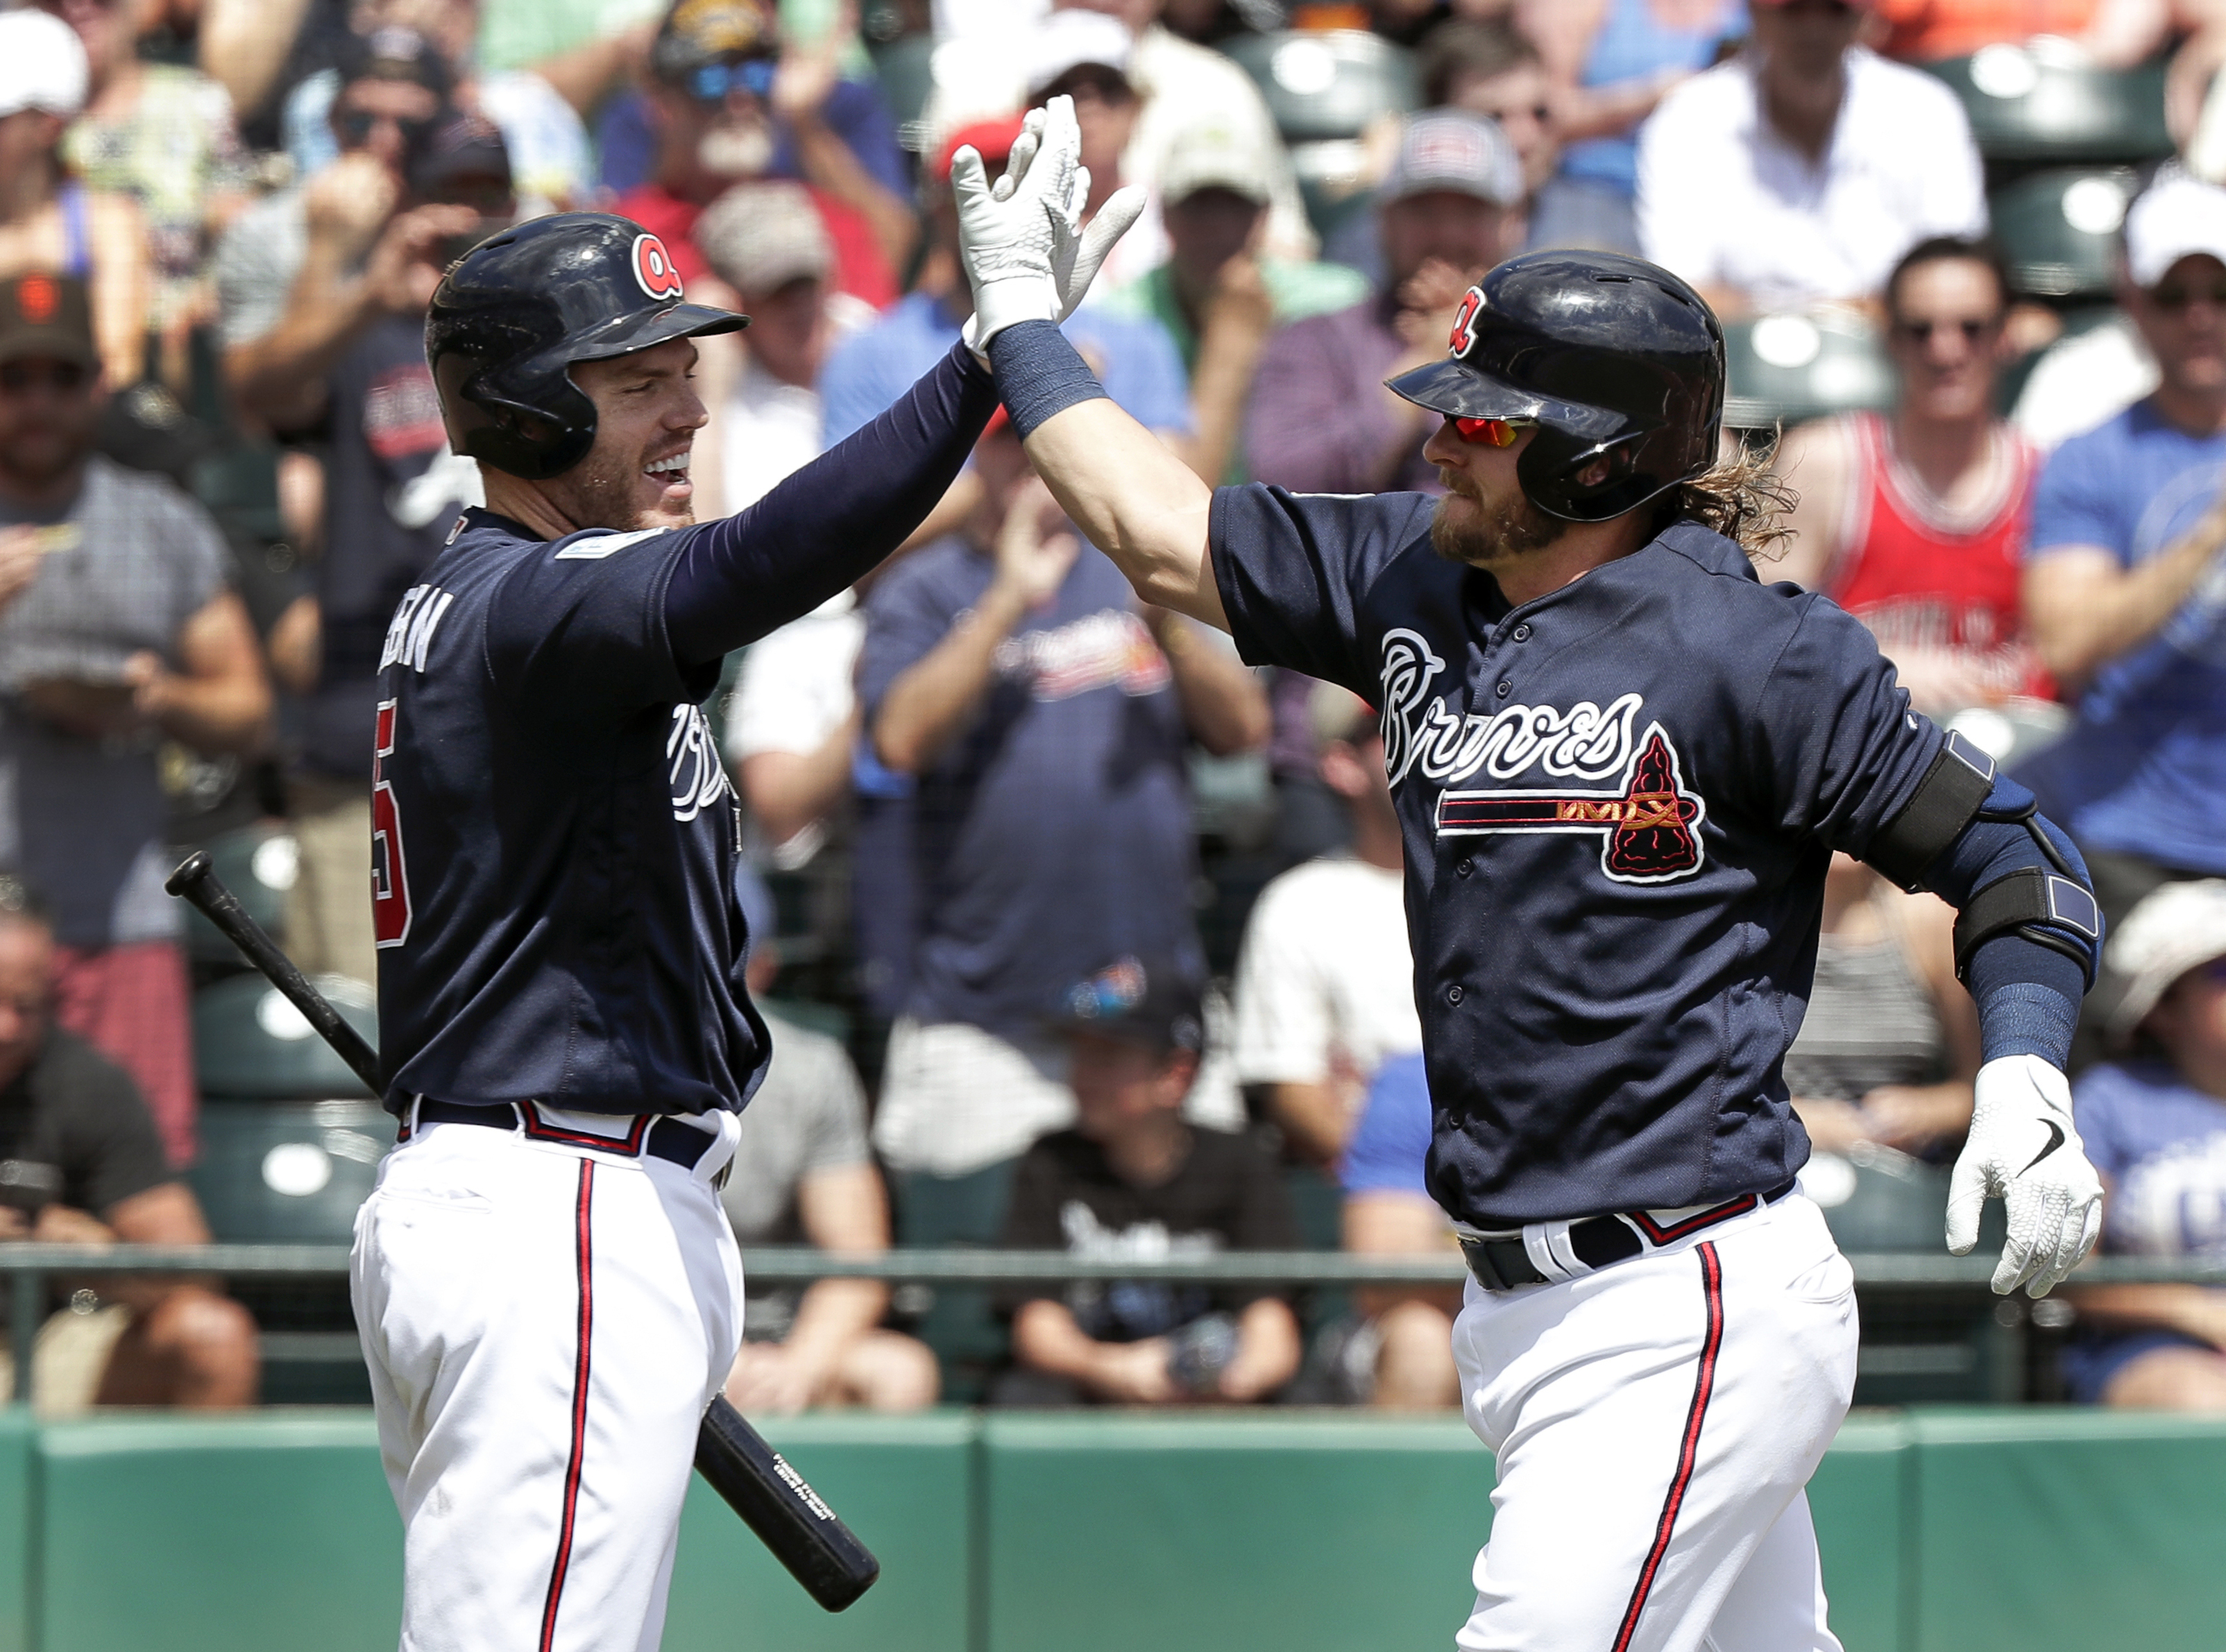 Even as defending champ, Braves still underdogs in NL East